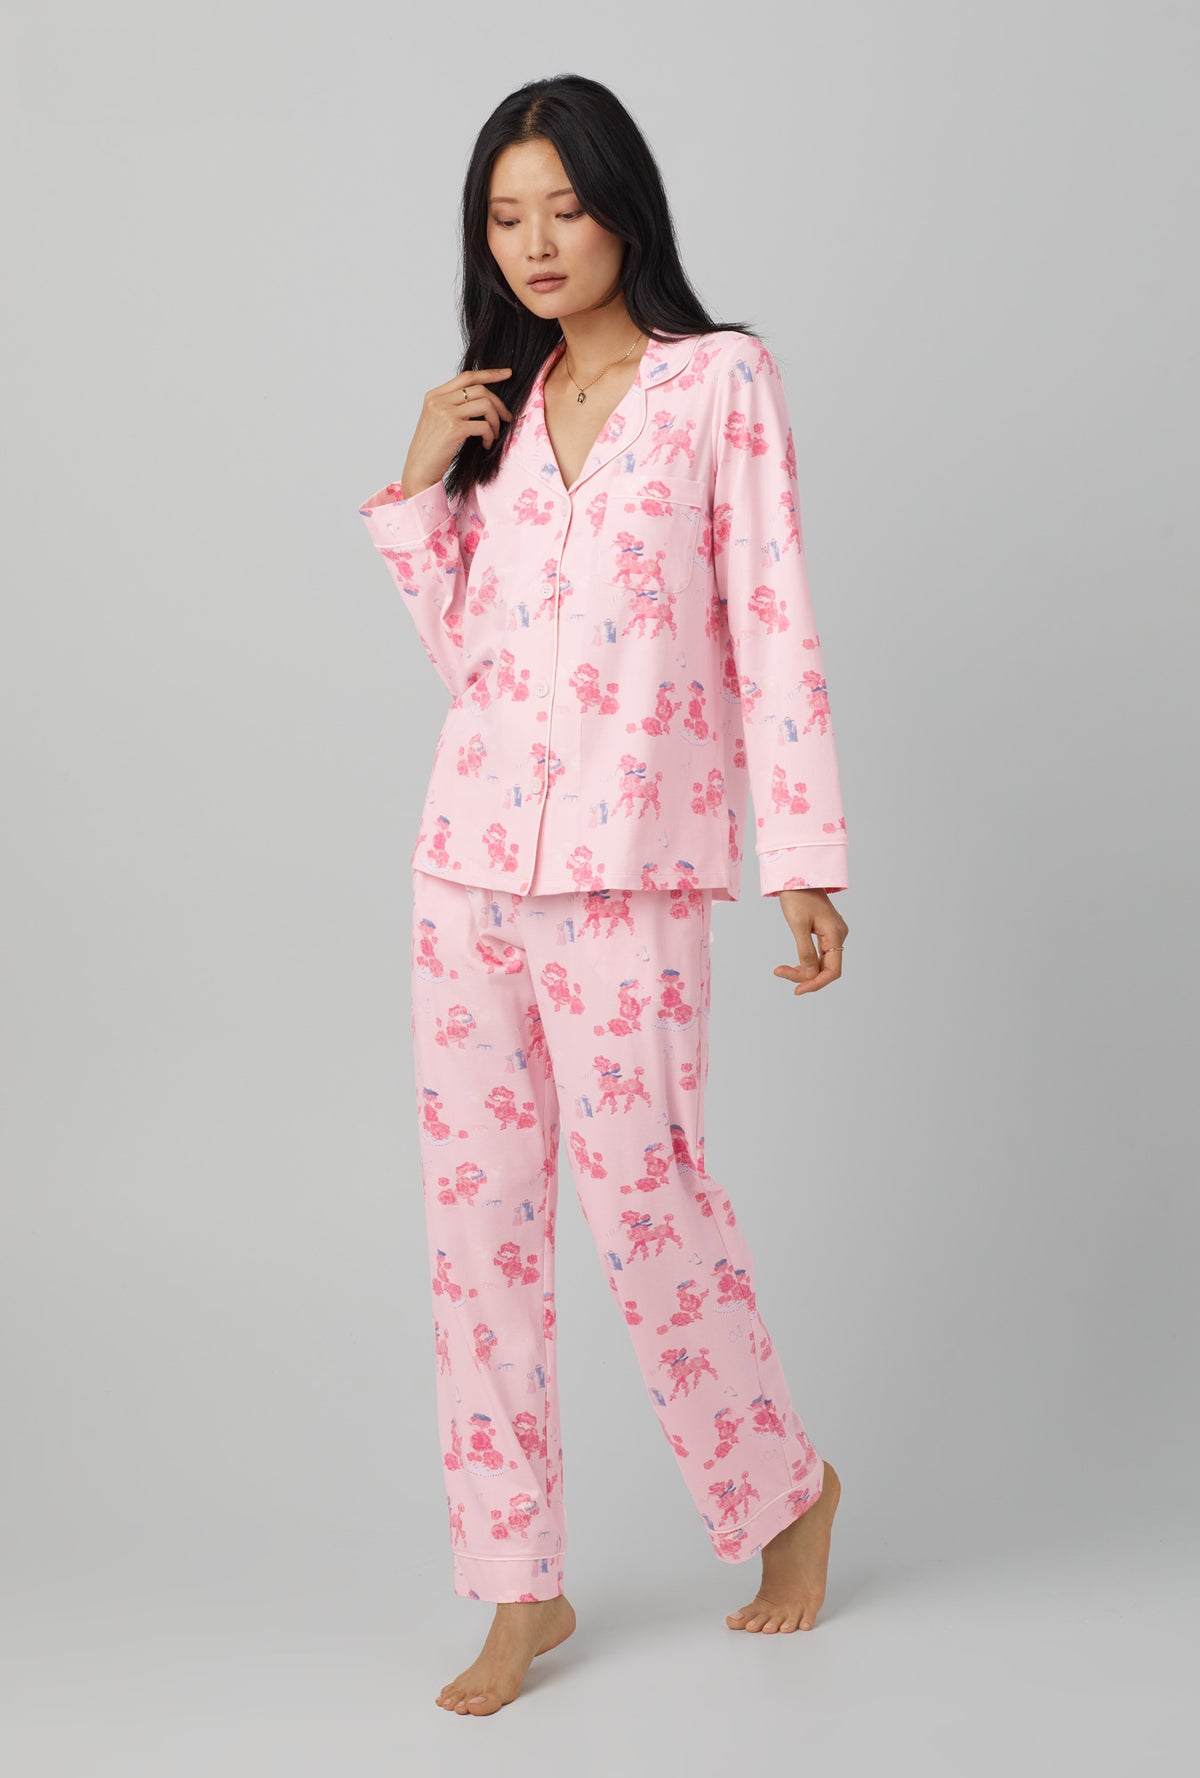 A lady wearing Pink Long Sleeve Classic Stretch Jersey PJ Set with Pampered Poodles  print